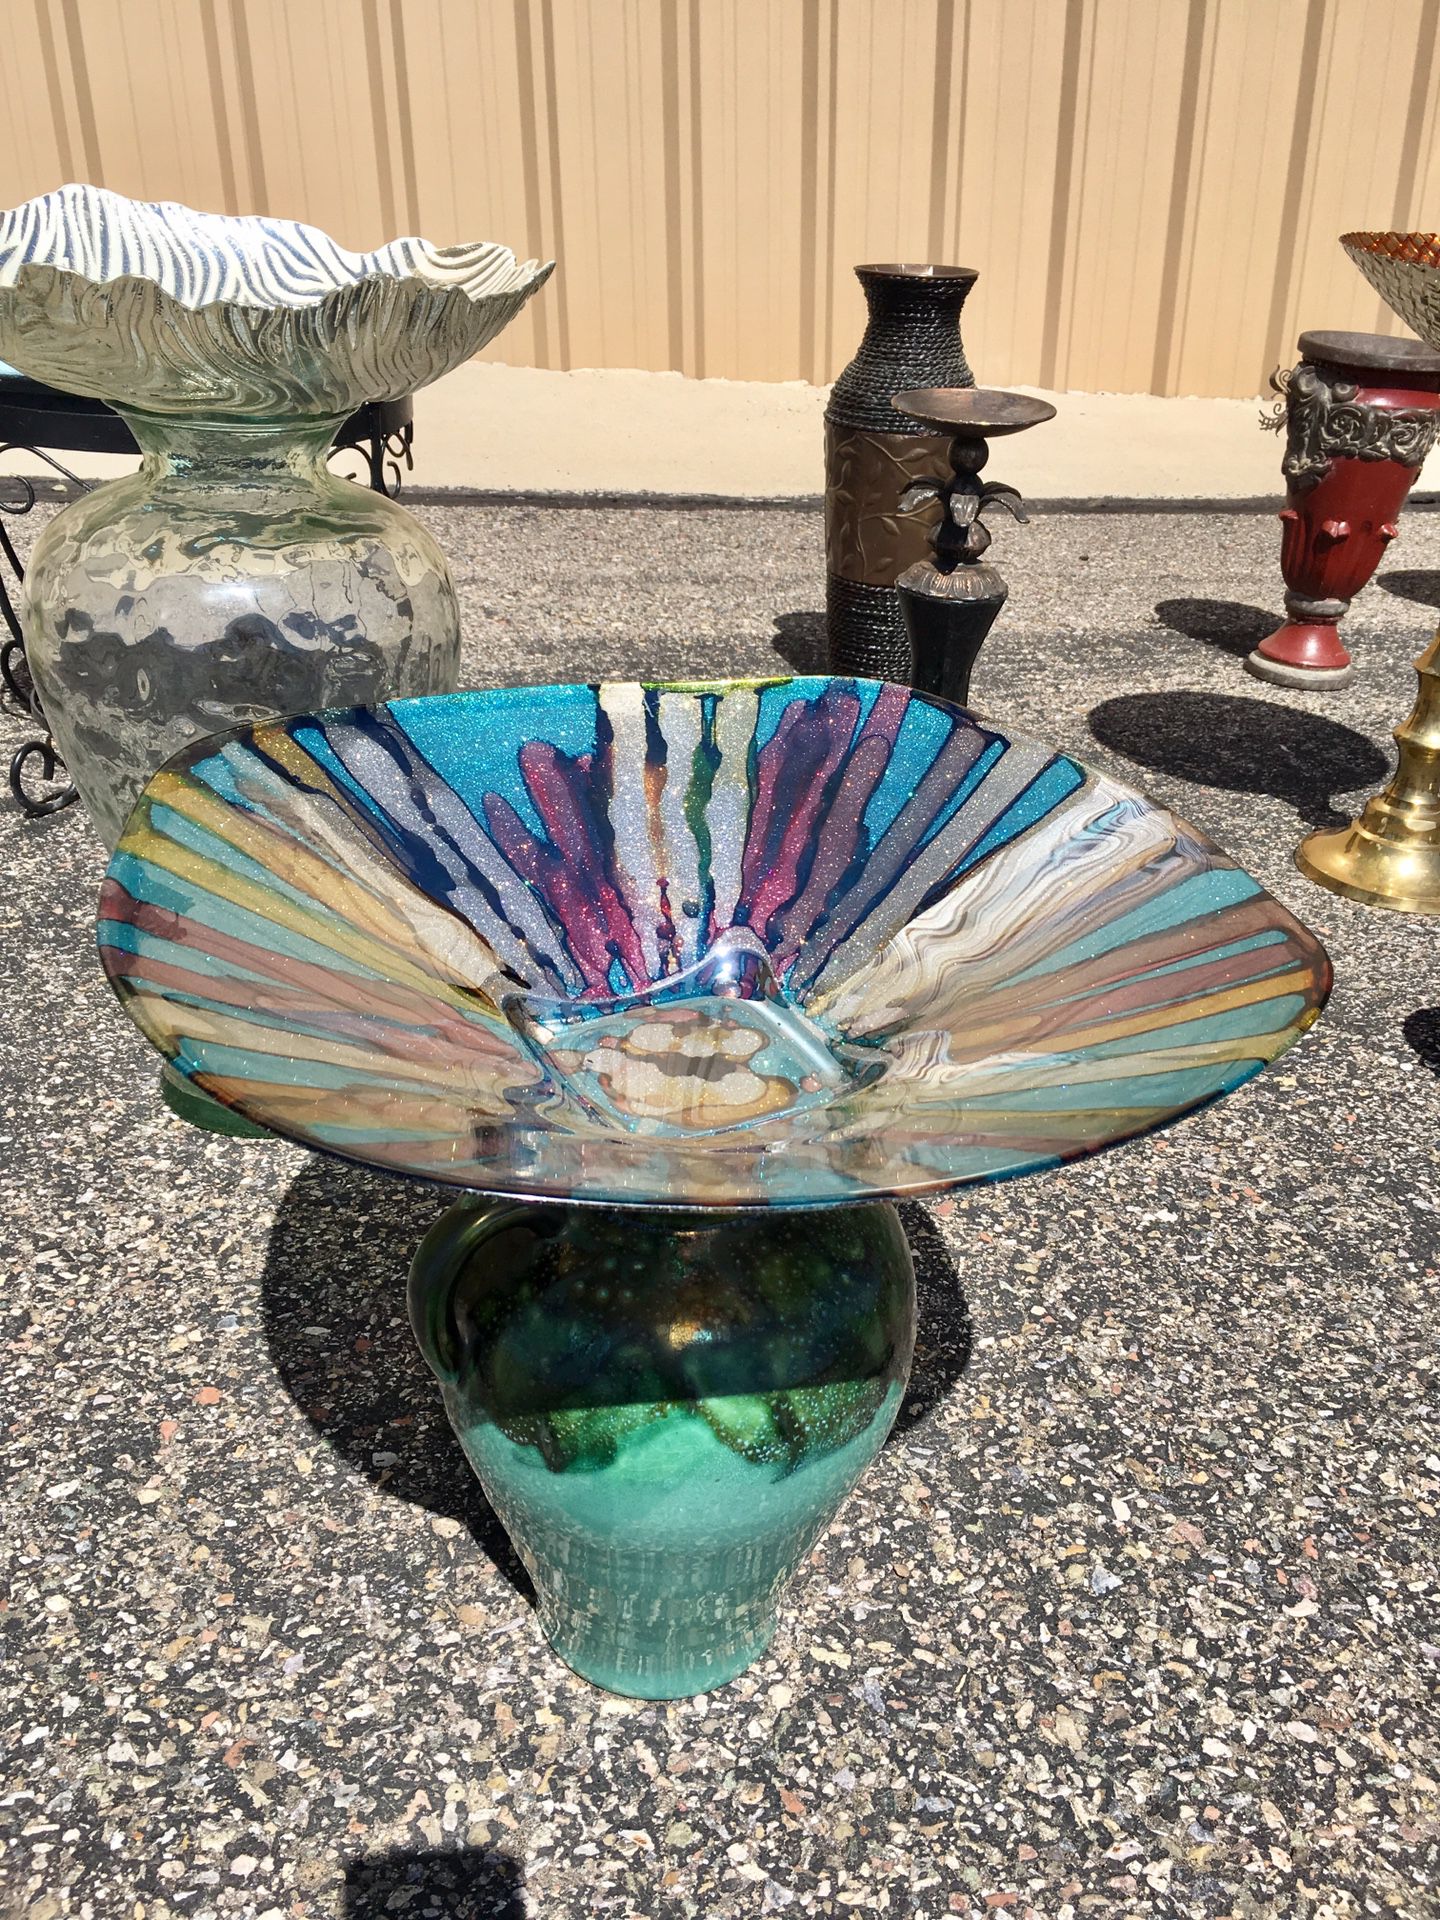 Bird Bath or Feeder for your Spring Garden- vibrant sparkle Dish with Pottery Stand!